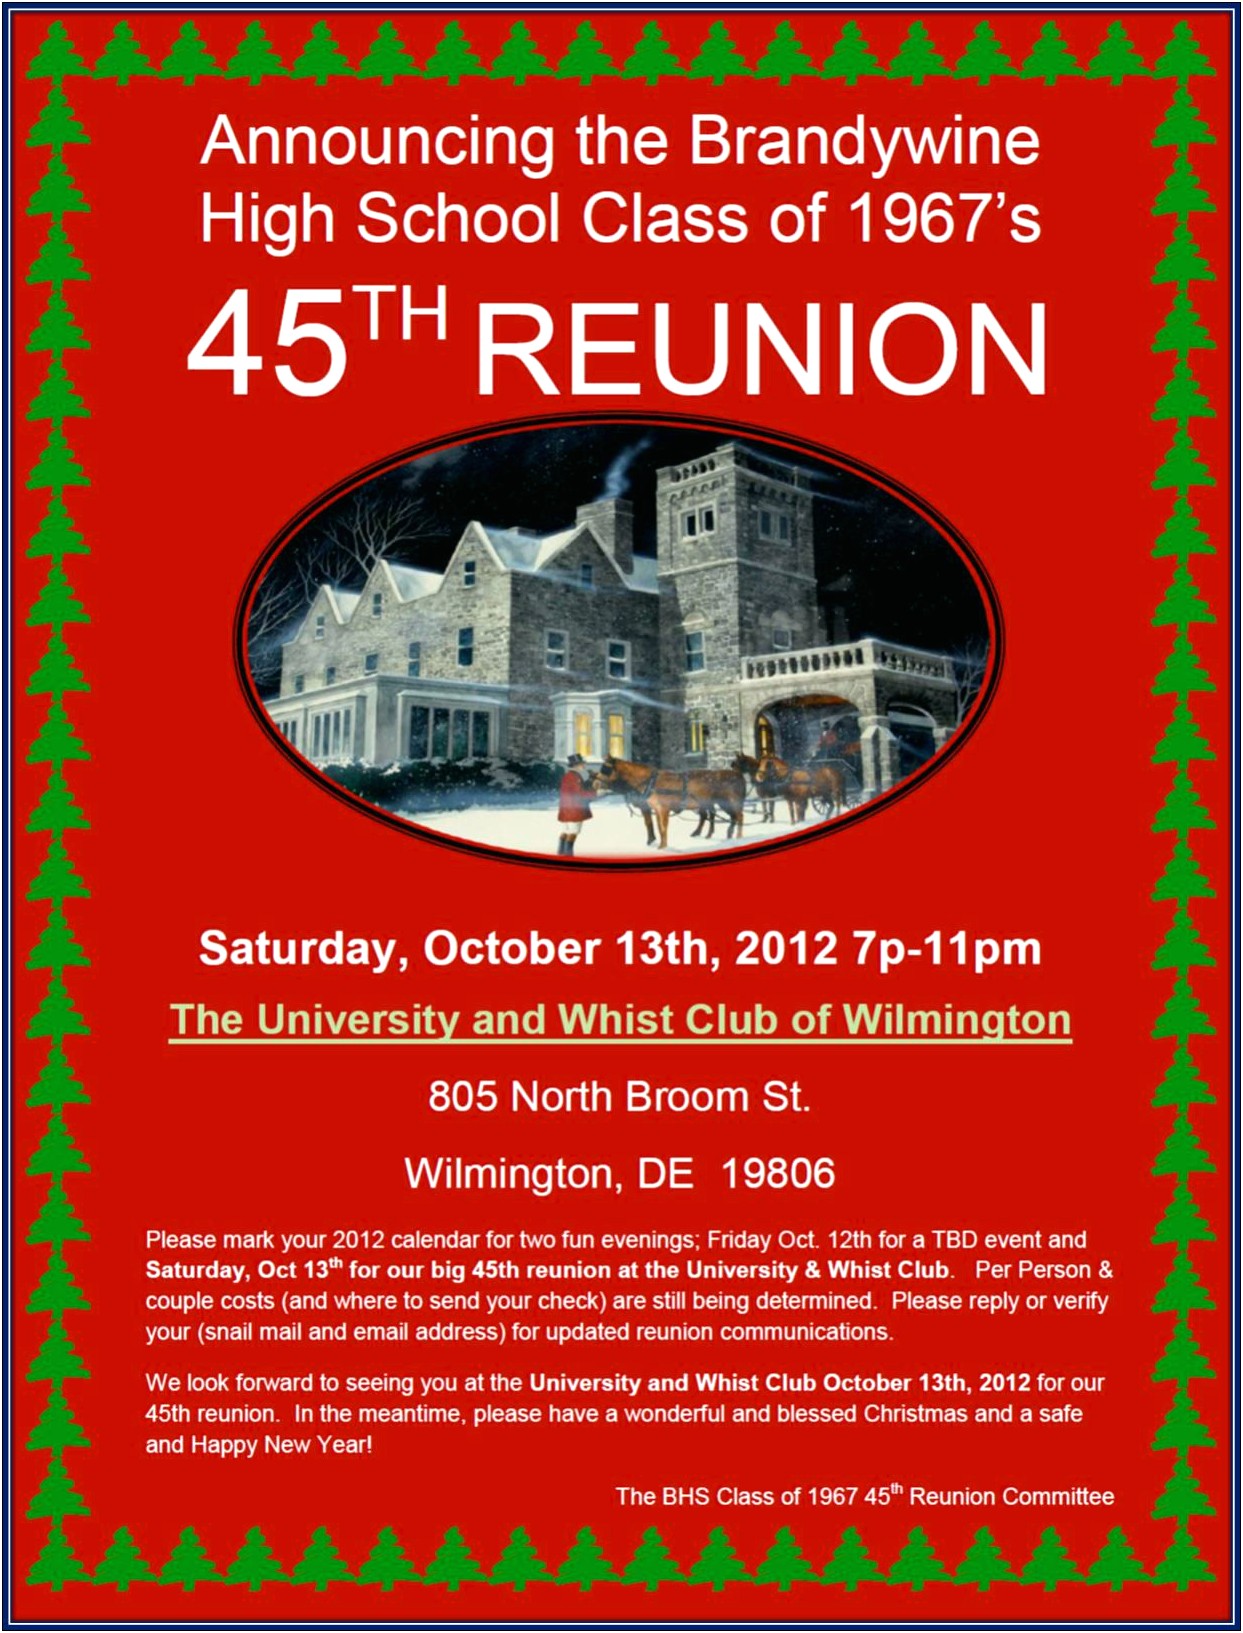 Free Funny Family Reunion Flyer Template Word